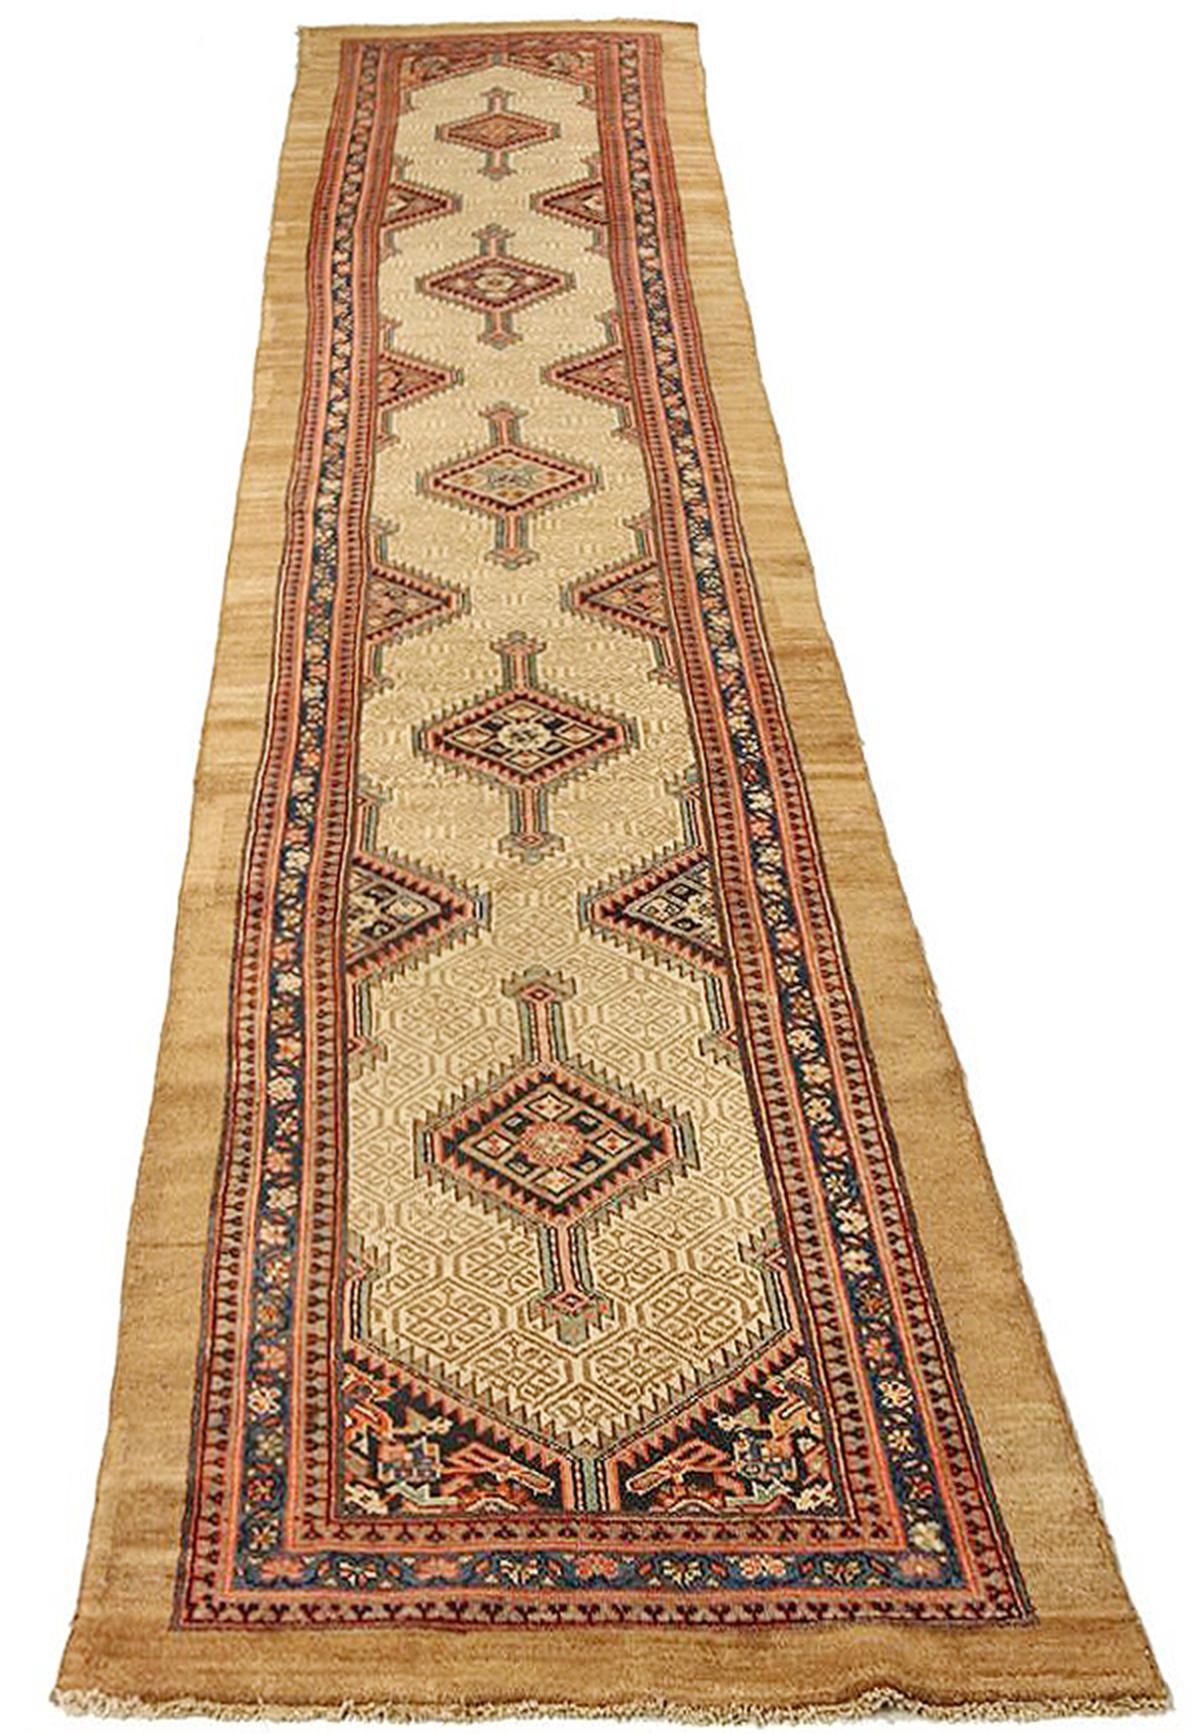 Hand-Woven 1890 Antique Persian Sarab Runner Rug with Brown and Beige Geometric Details For Sale